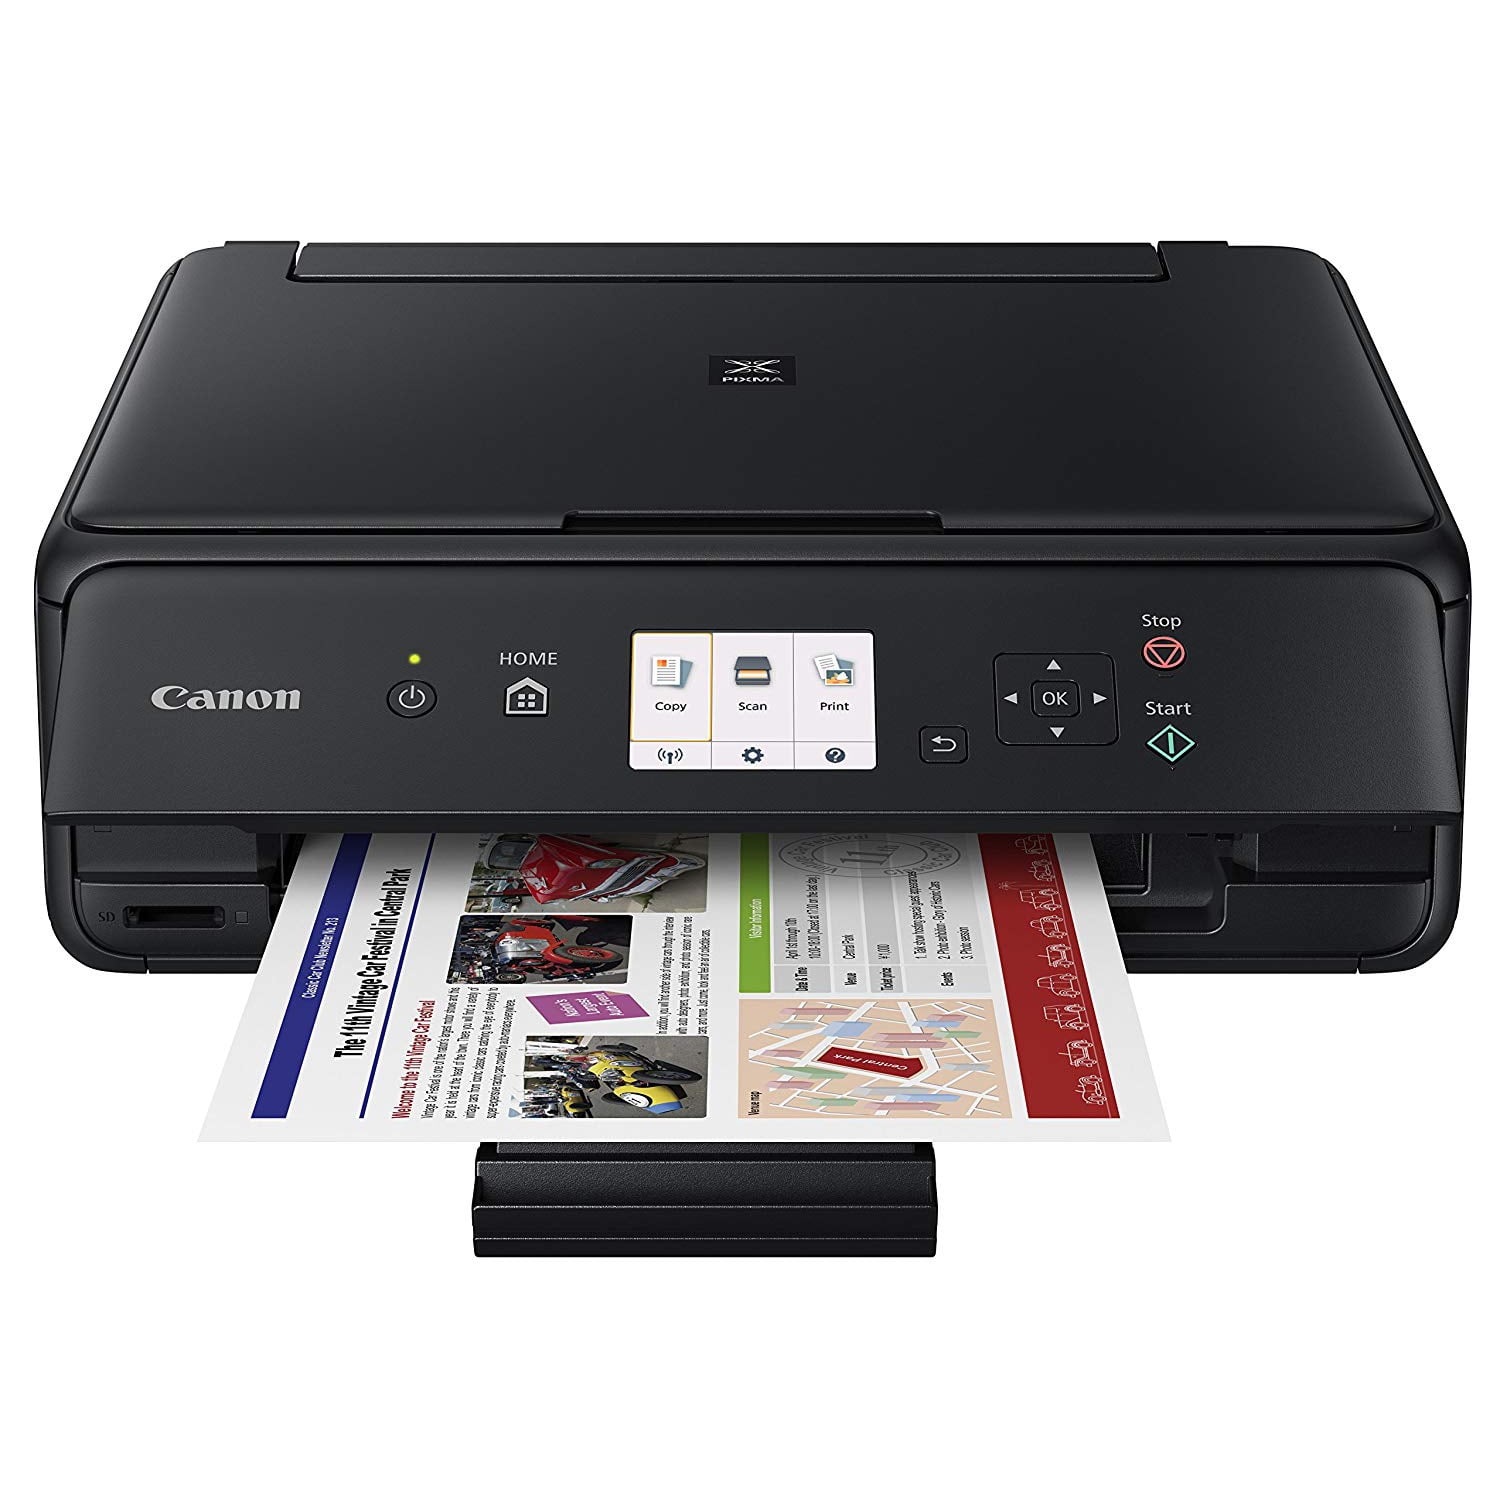 Black Canon Office Products PIXMA TS5020 BK Wireless color Photo Printer with Scanner & Copier